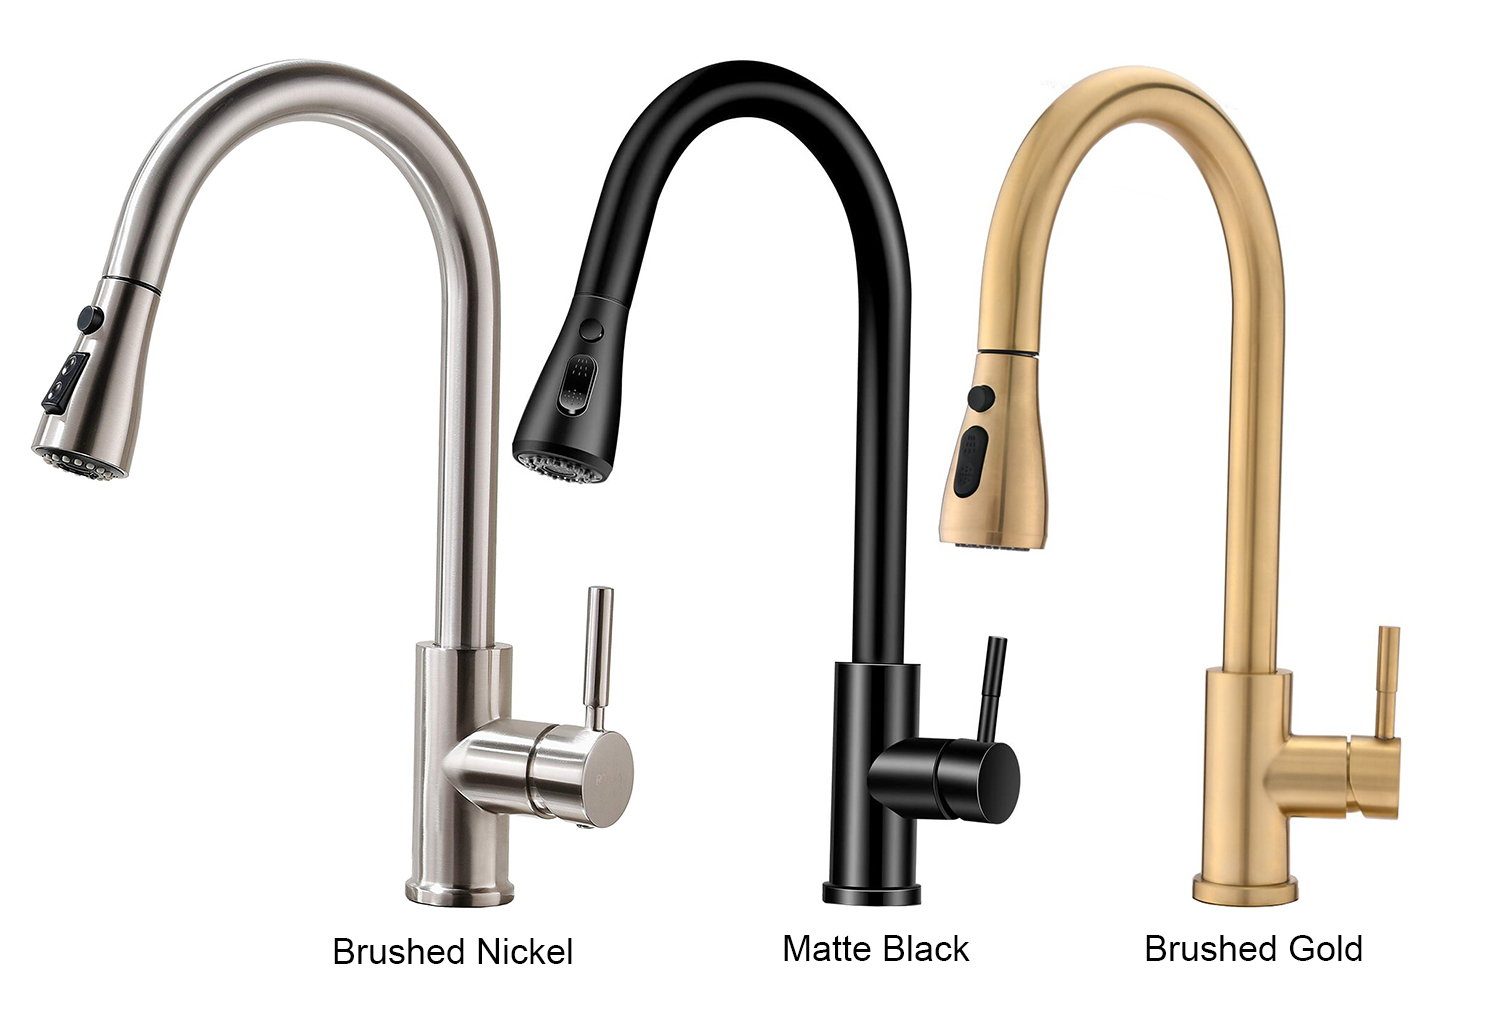 Good Quality Best Selling Service Stainless Steel Pull Down Kitchen Faucet with Multi-function Spray